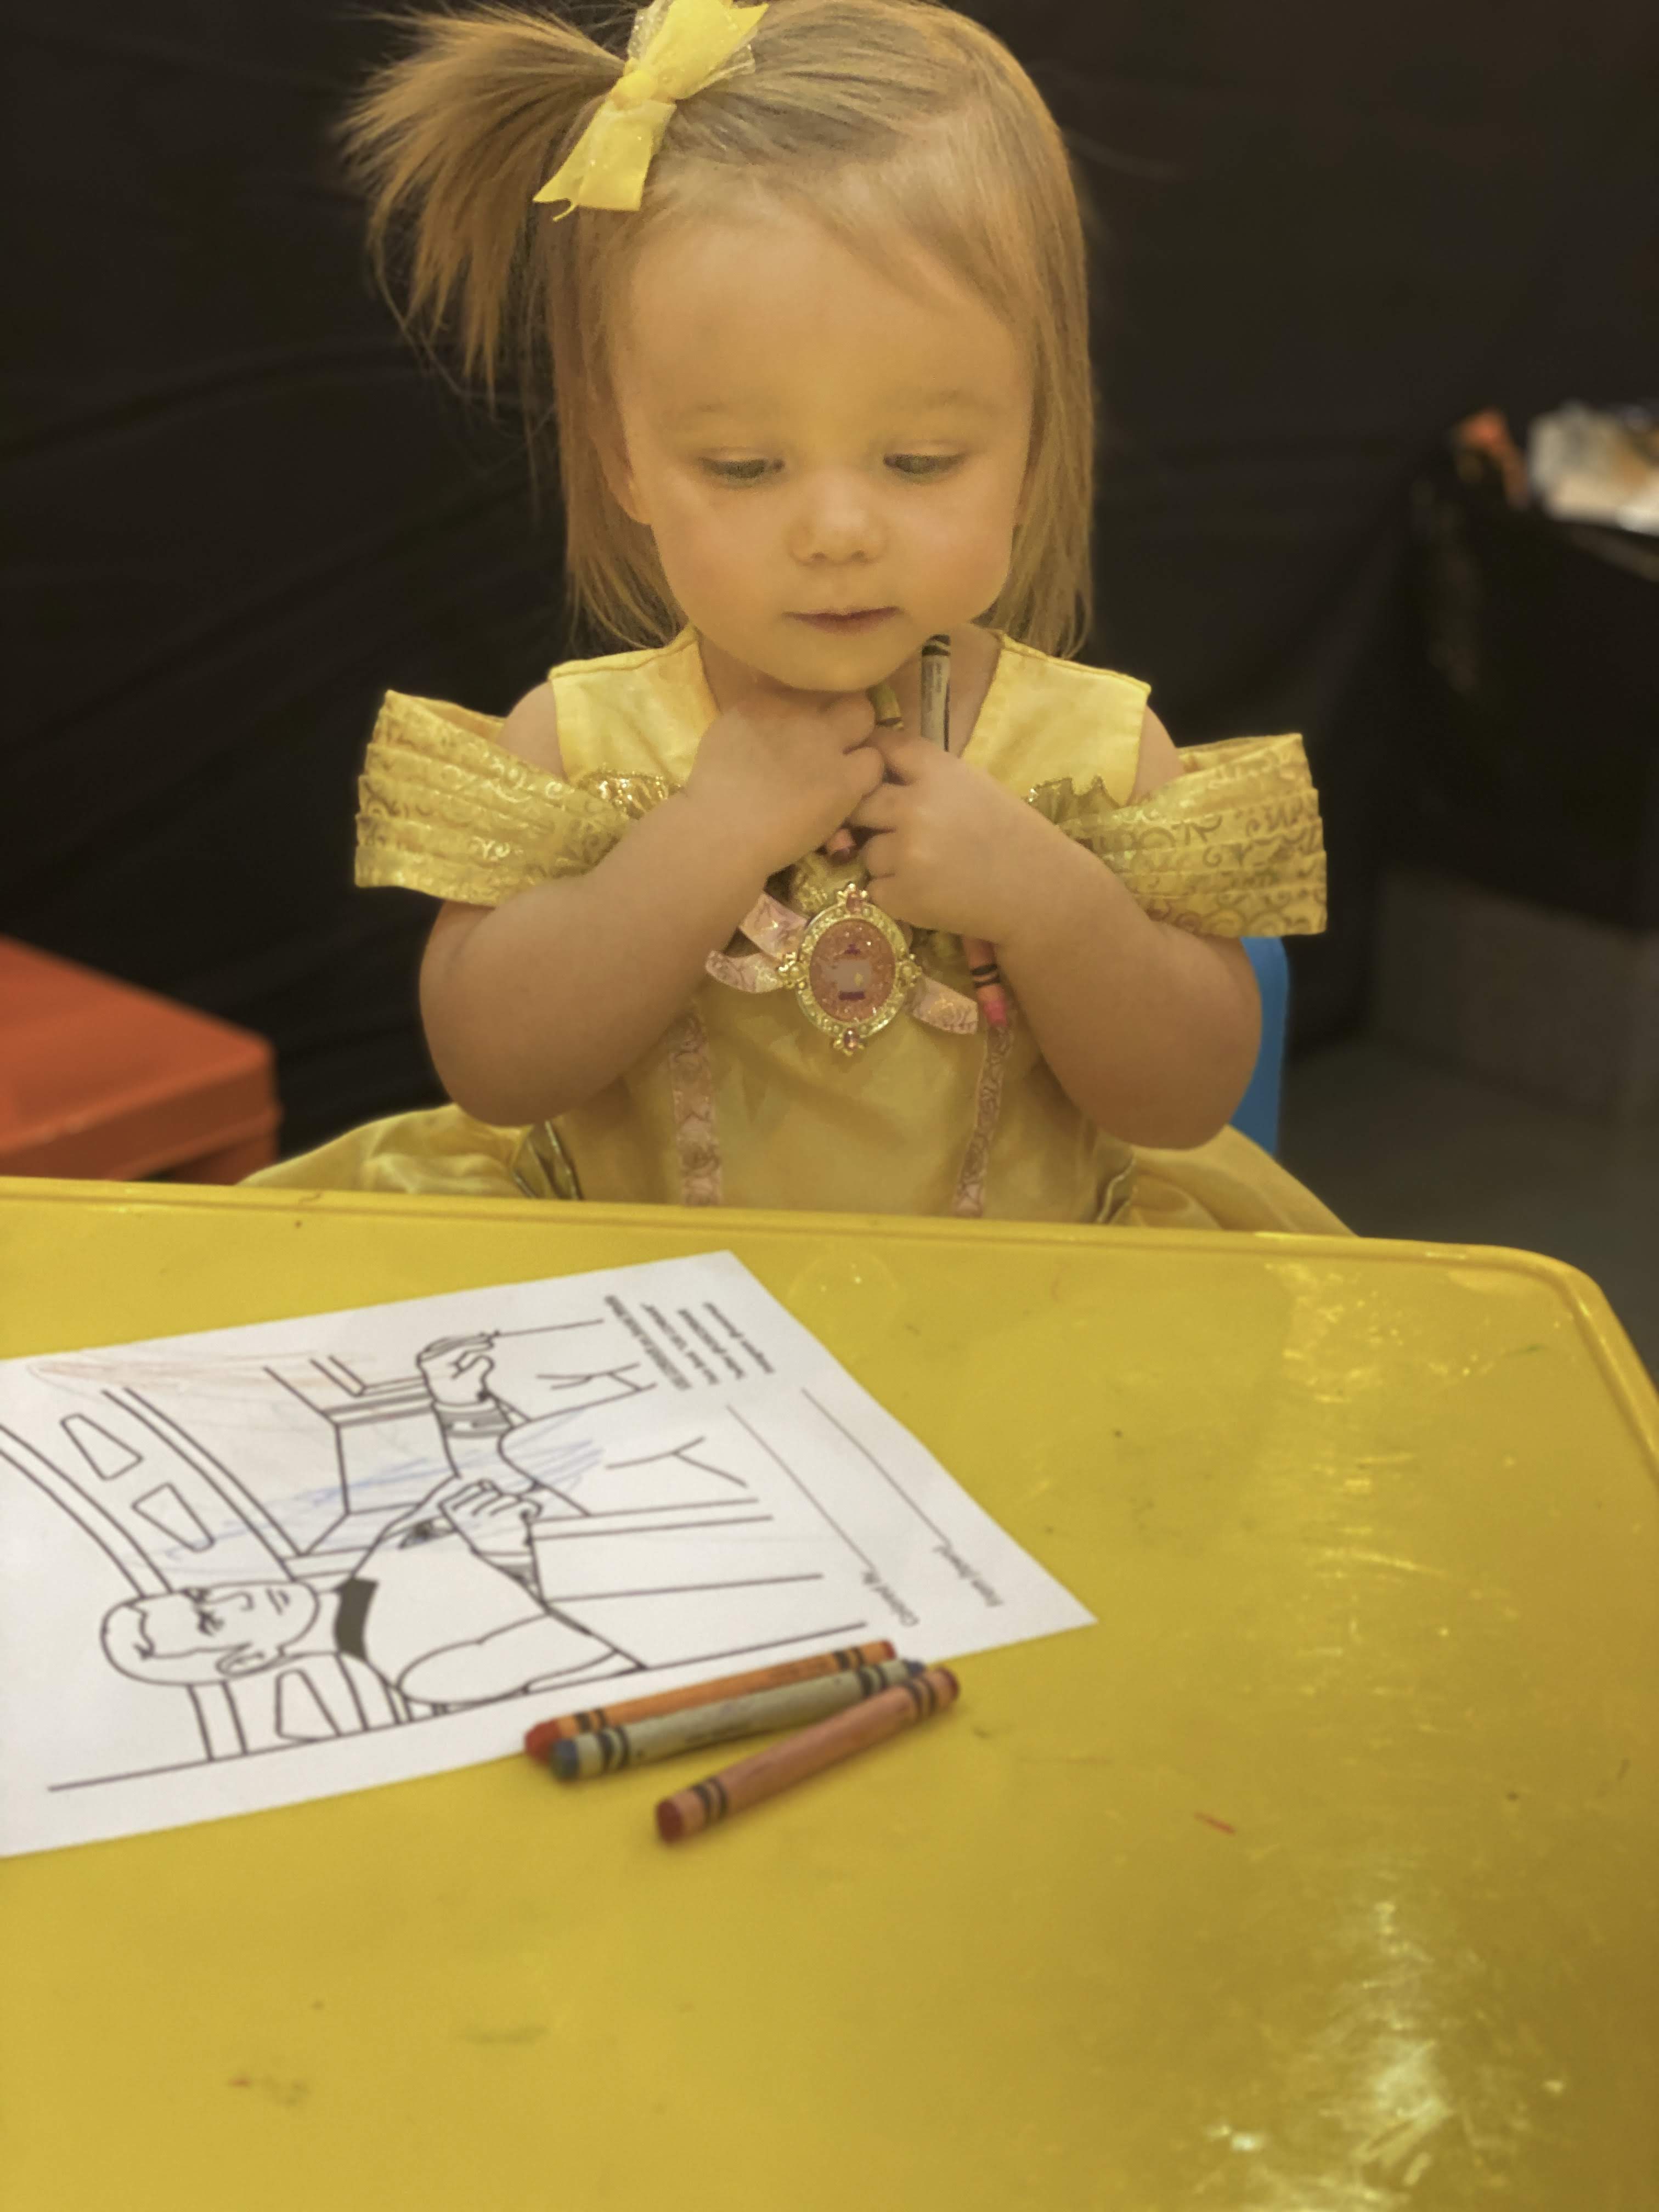 Big Easy Con 2019 Review: Our little one loved Big Easy Con Jr. 